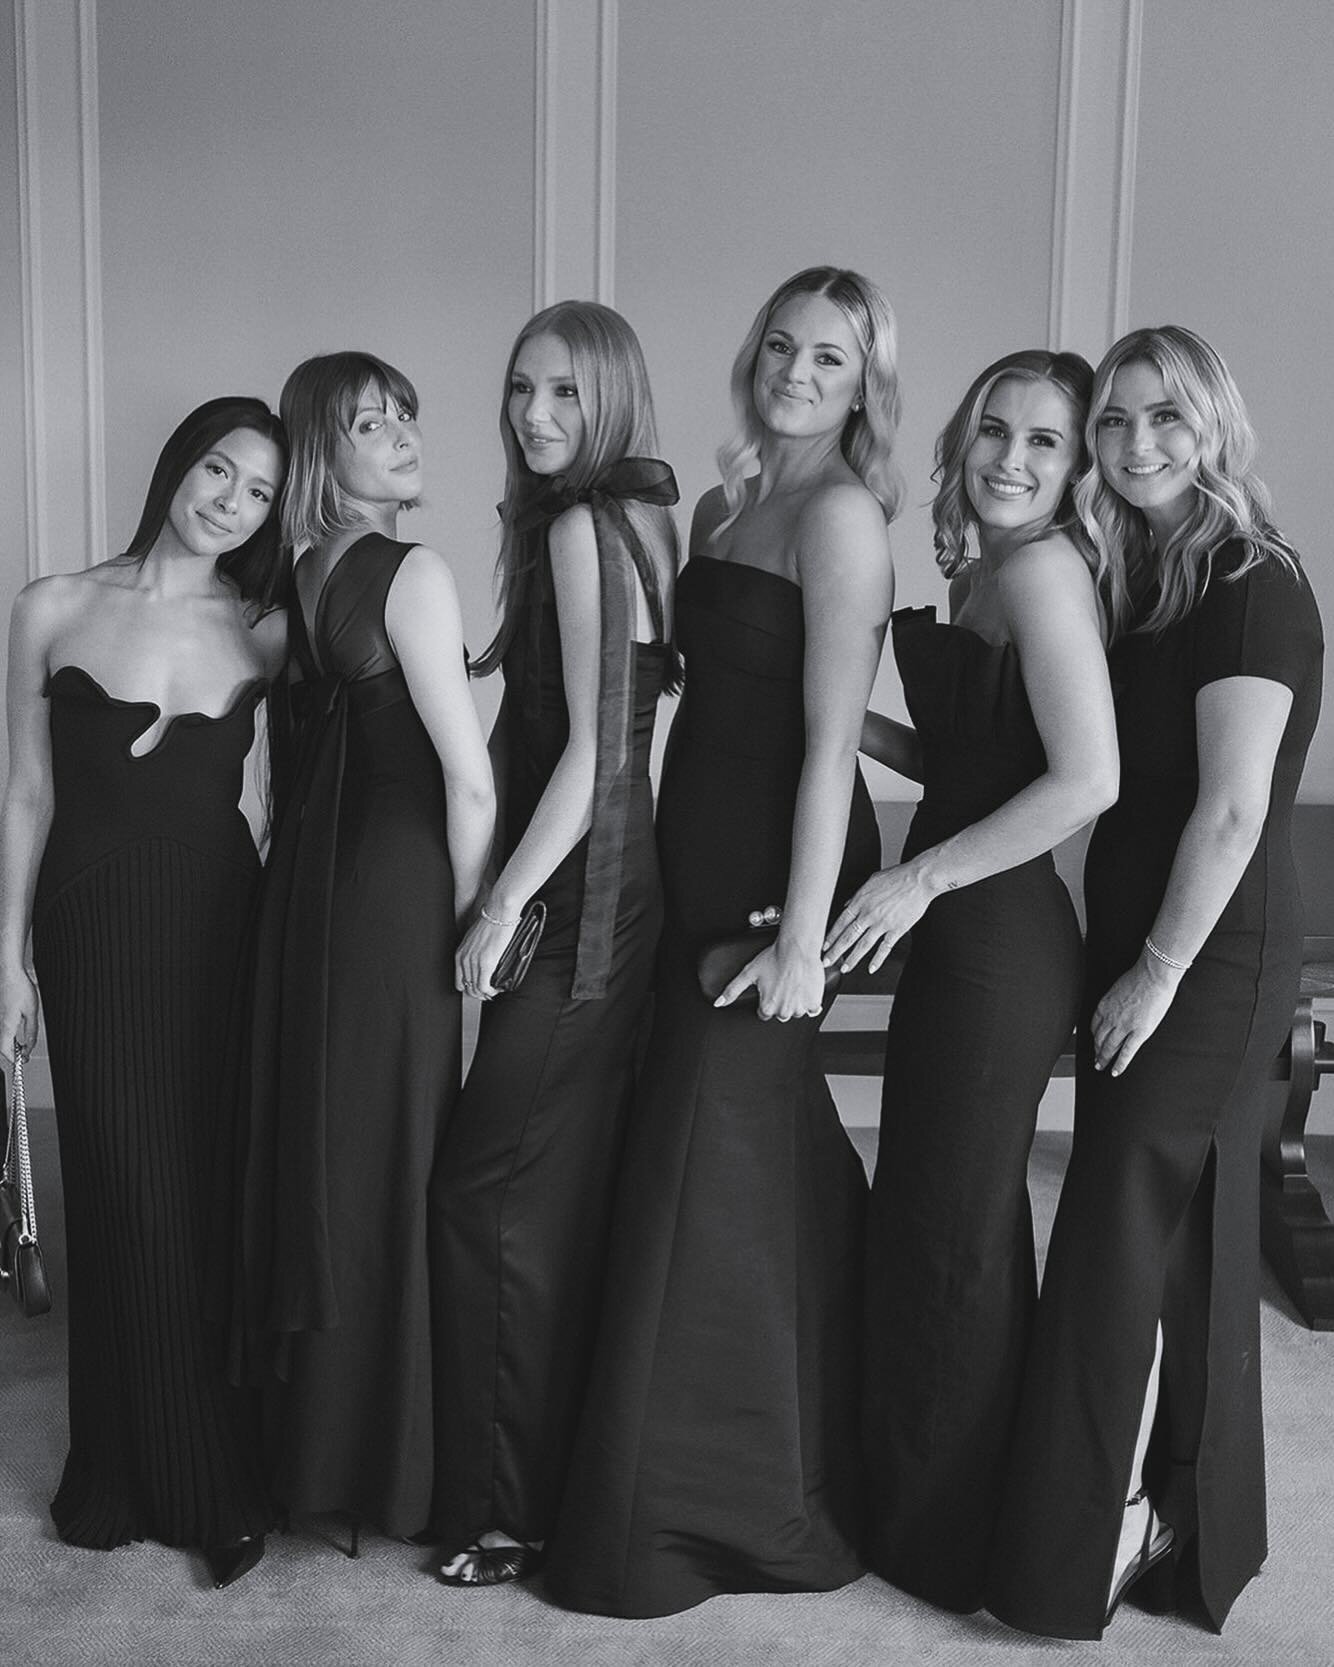 Bridesmaid dresses, but make it fashion 💫
Each gown striking and a chic statement. This is the exact reason you let your bridesmaids choose their dresses. 
Photo: @jessicariekephoto 
Beauty:  @missmarissartistry  @themakeupdolls 
#bridesmaids #bride